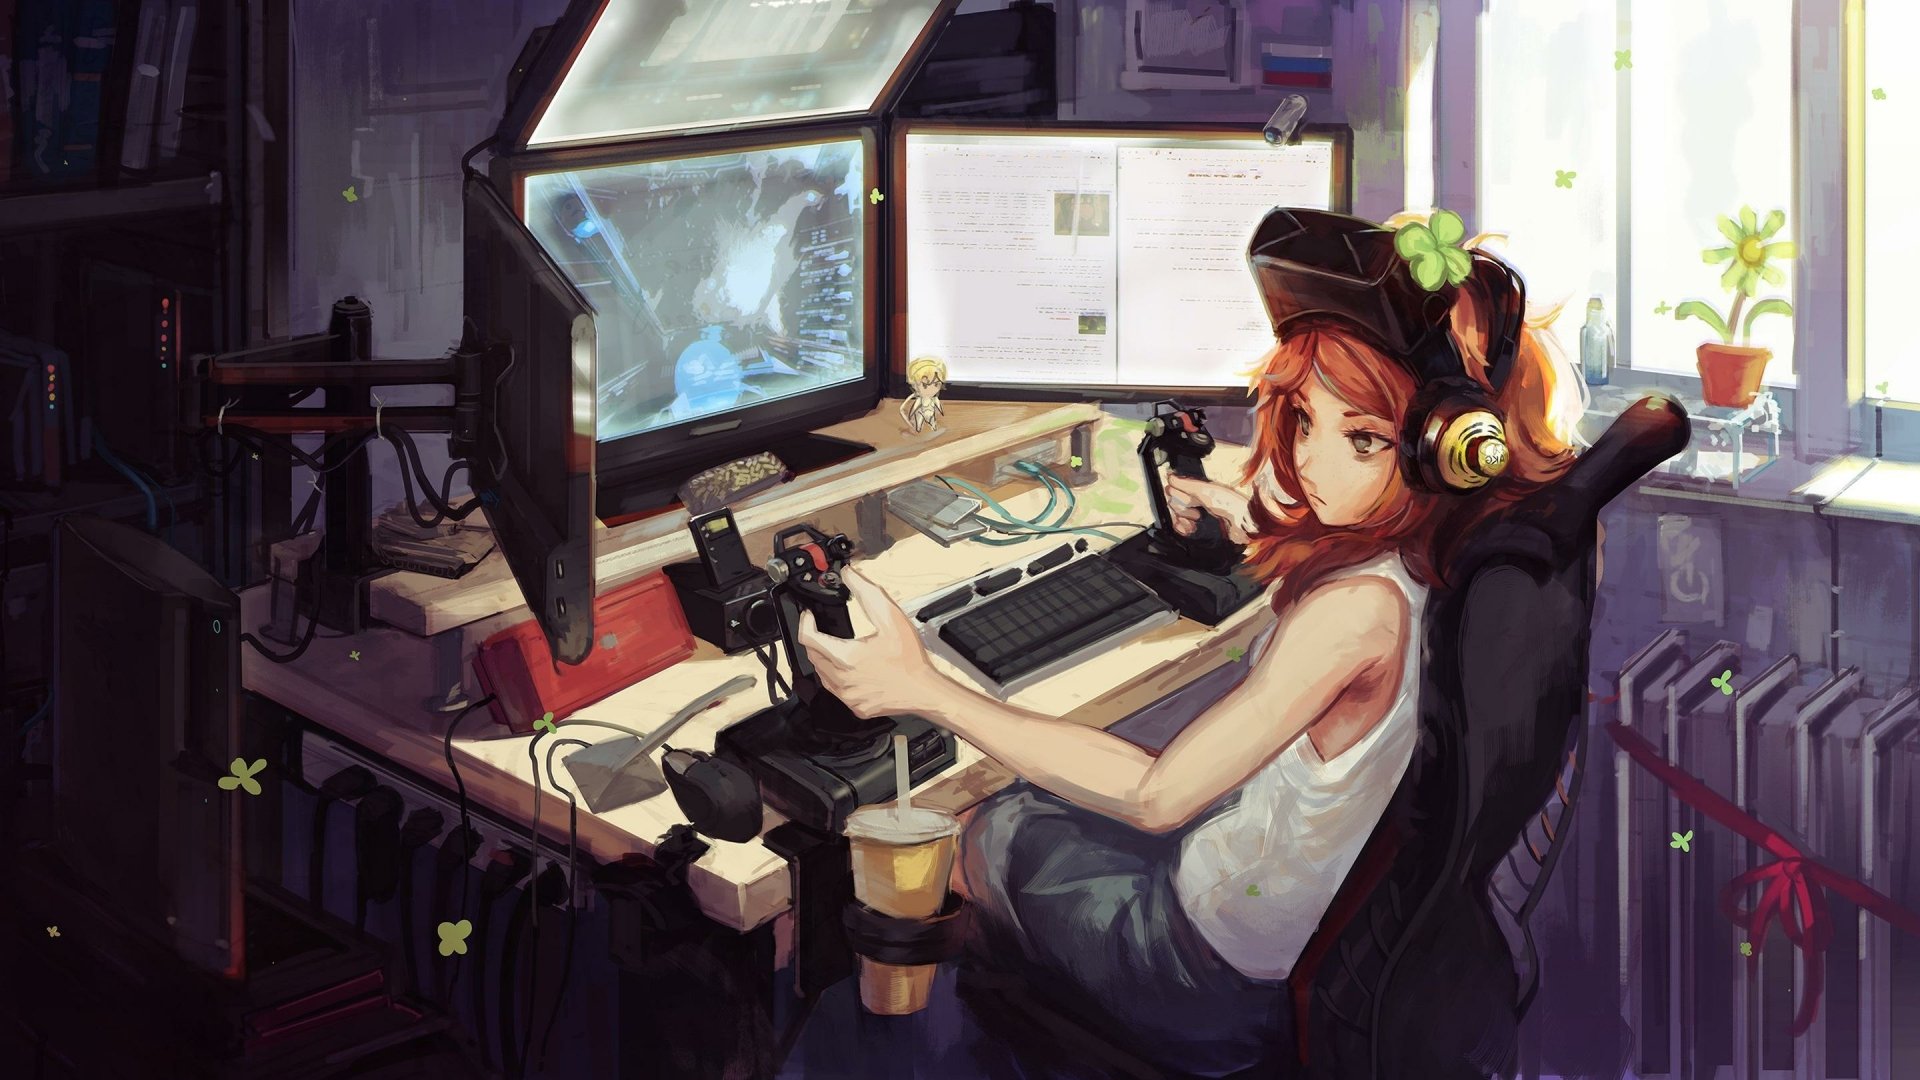 Gamer Girl Of The Future